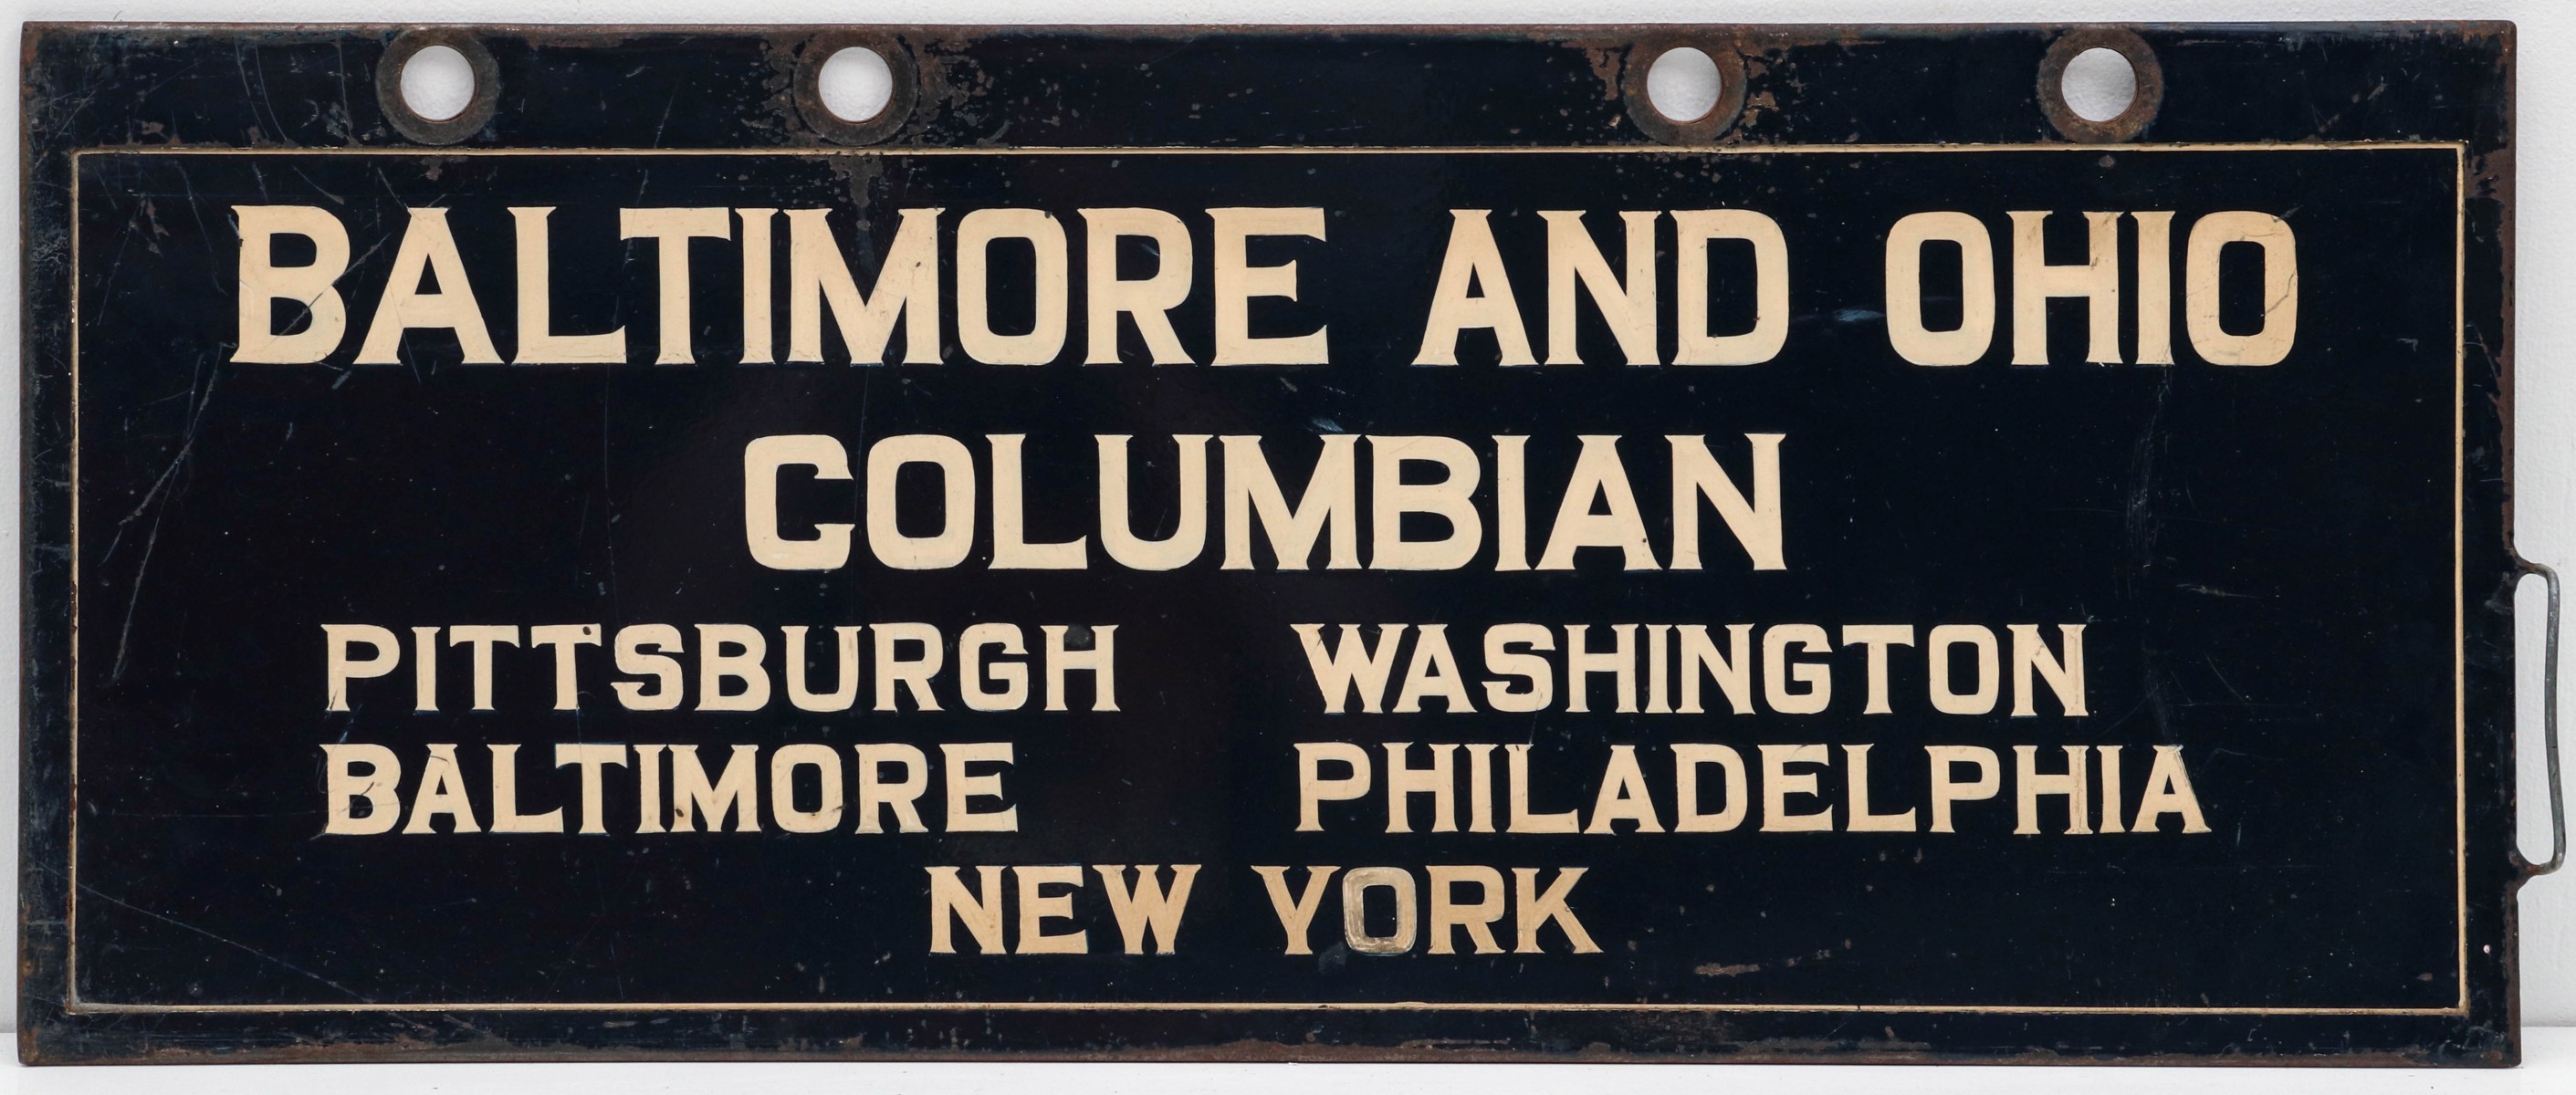 GATE SIGN FOR THE BALTIMORE AND OHIO COLUMBIAN